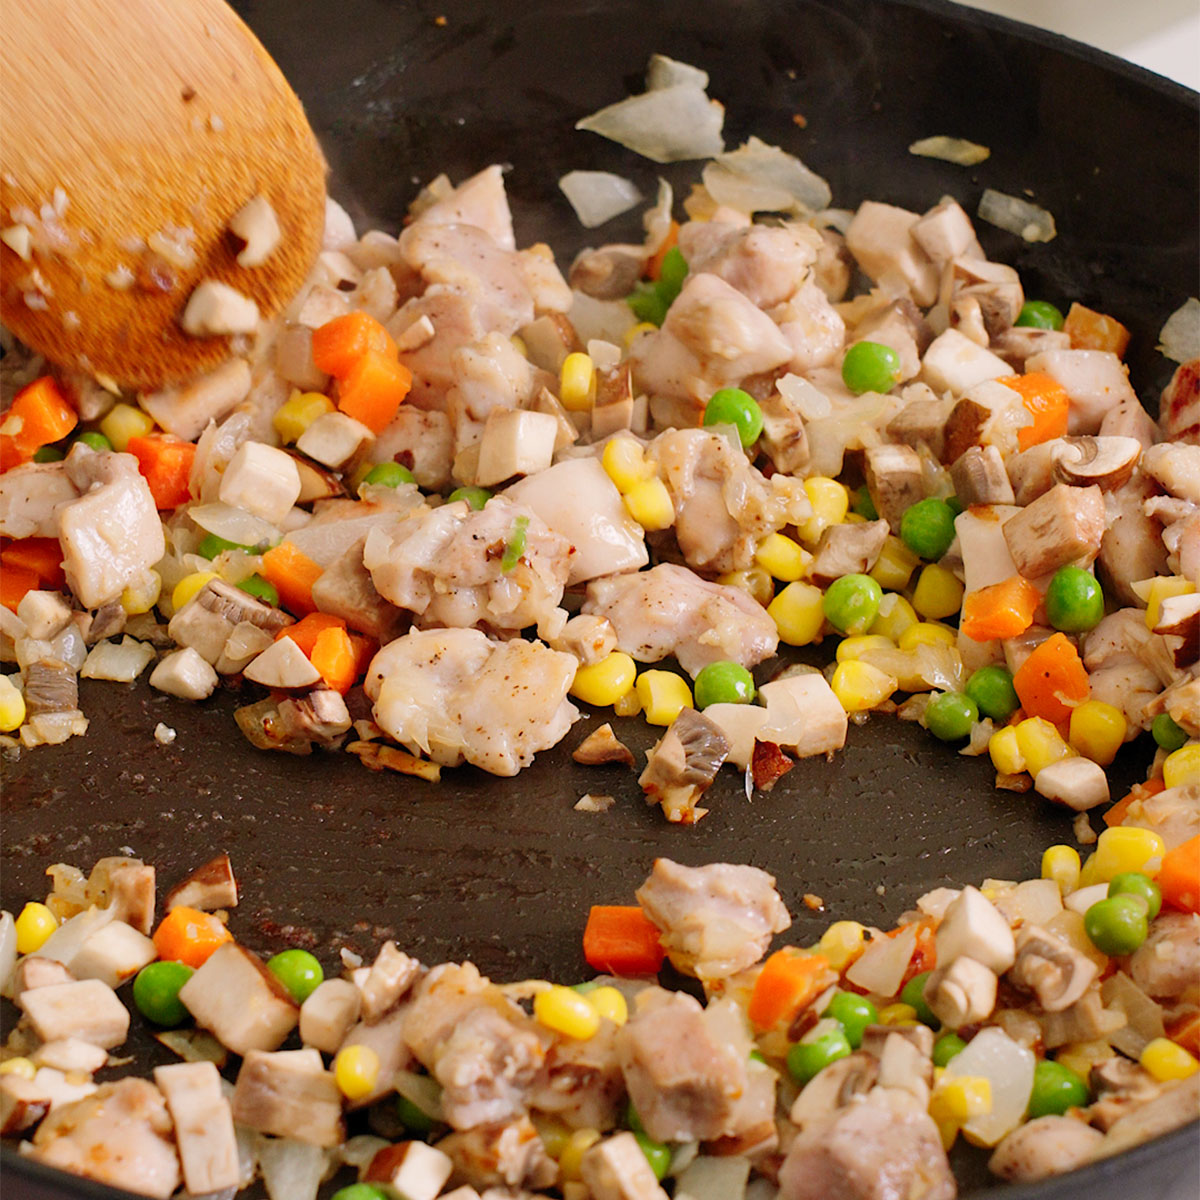 Cooking the frozen vegetables and mushrooms in the large skillet.